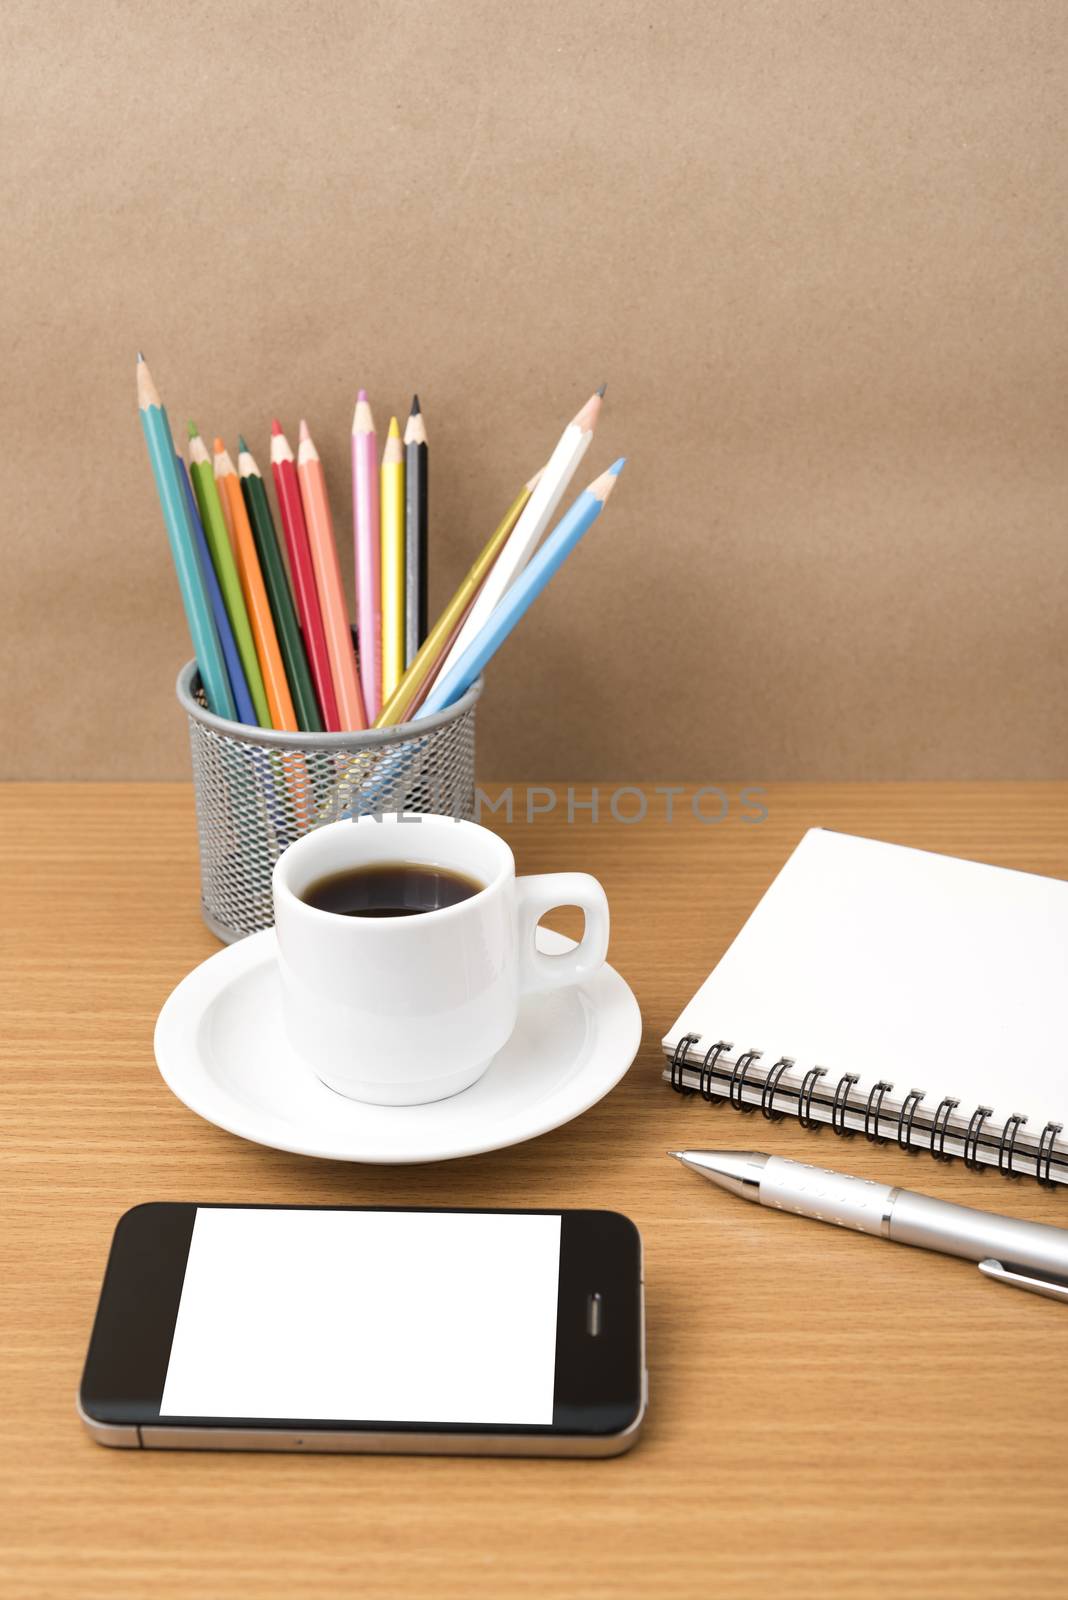 coffe,phone,notepad and color pencil on wood table background